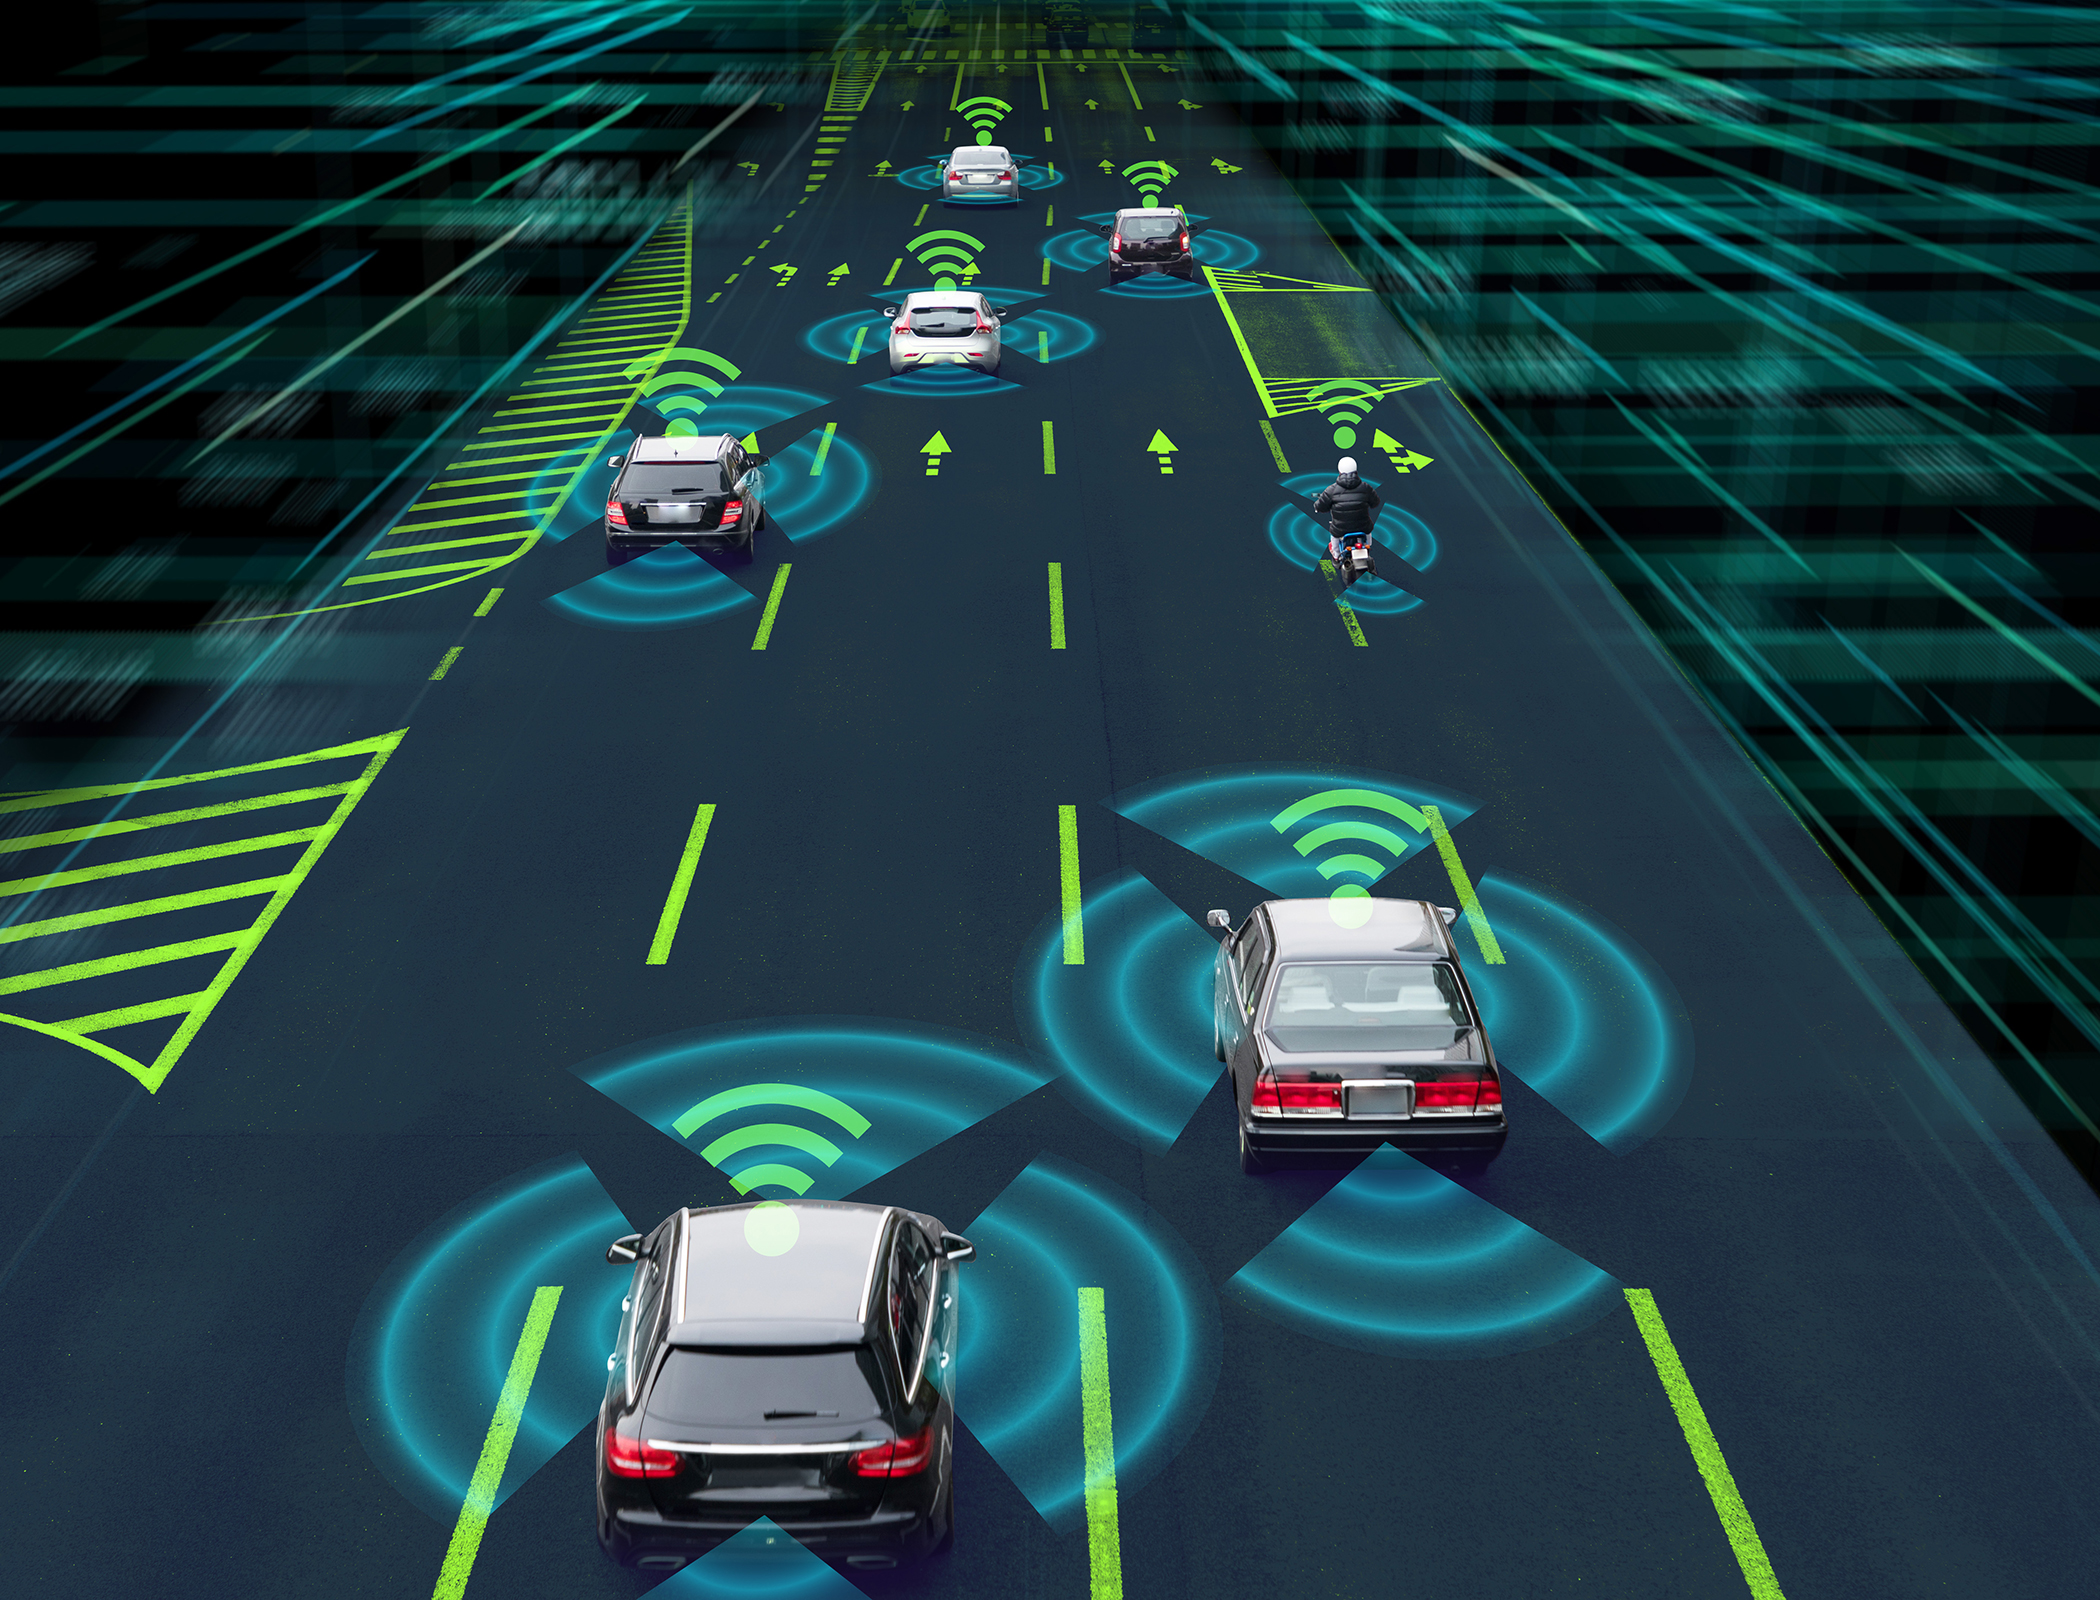 Self-driving cars could slow down traffic, study finds